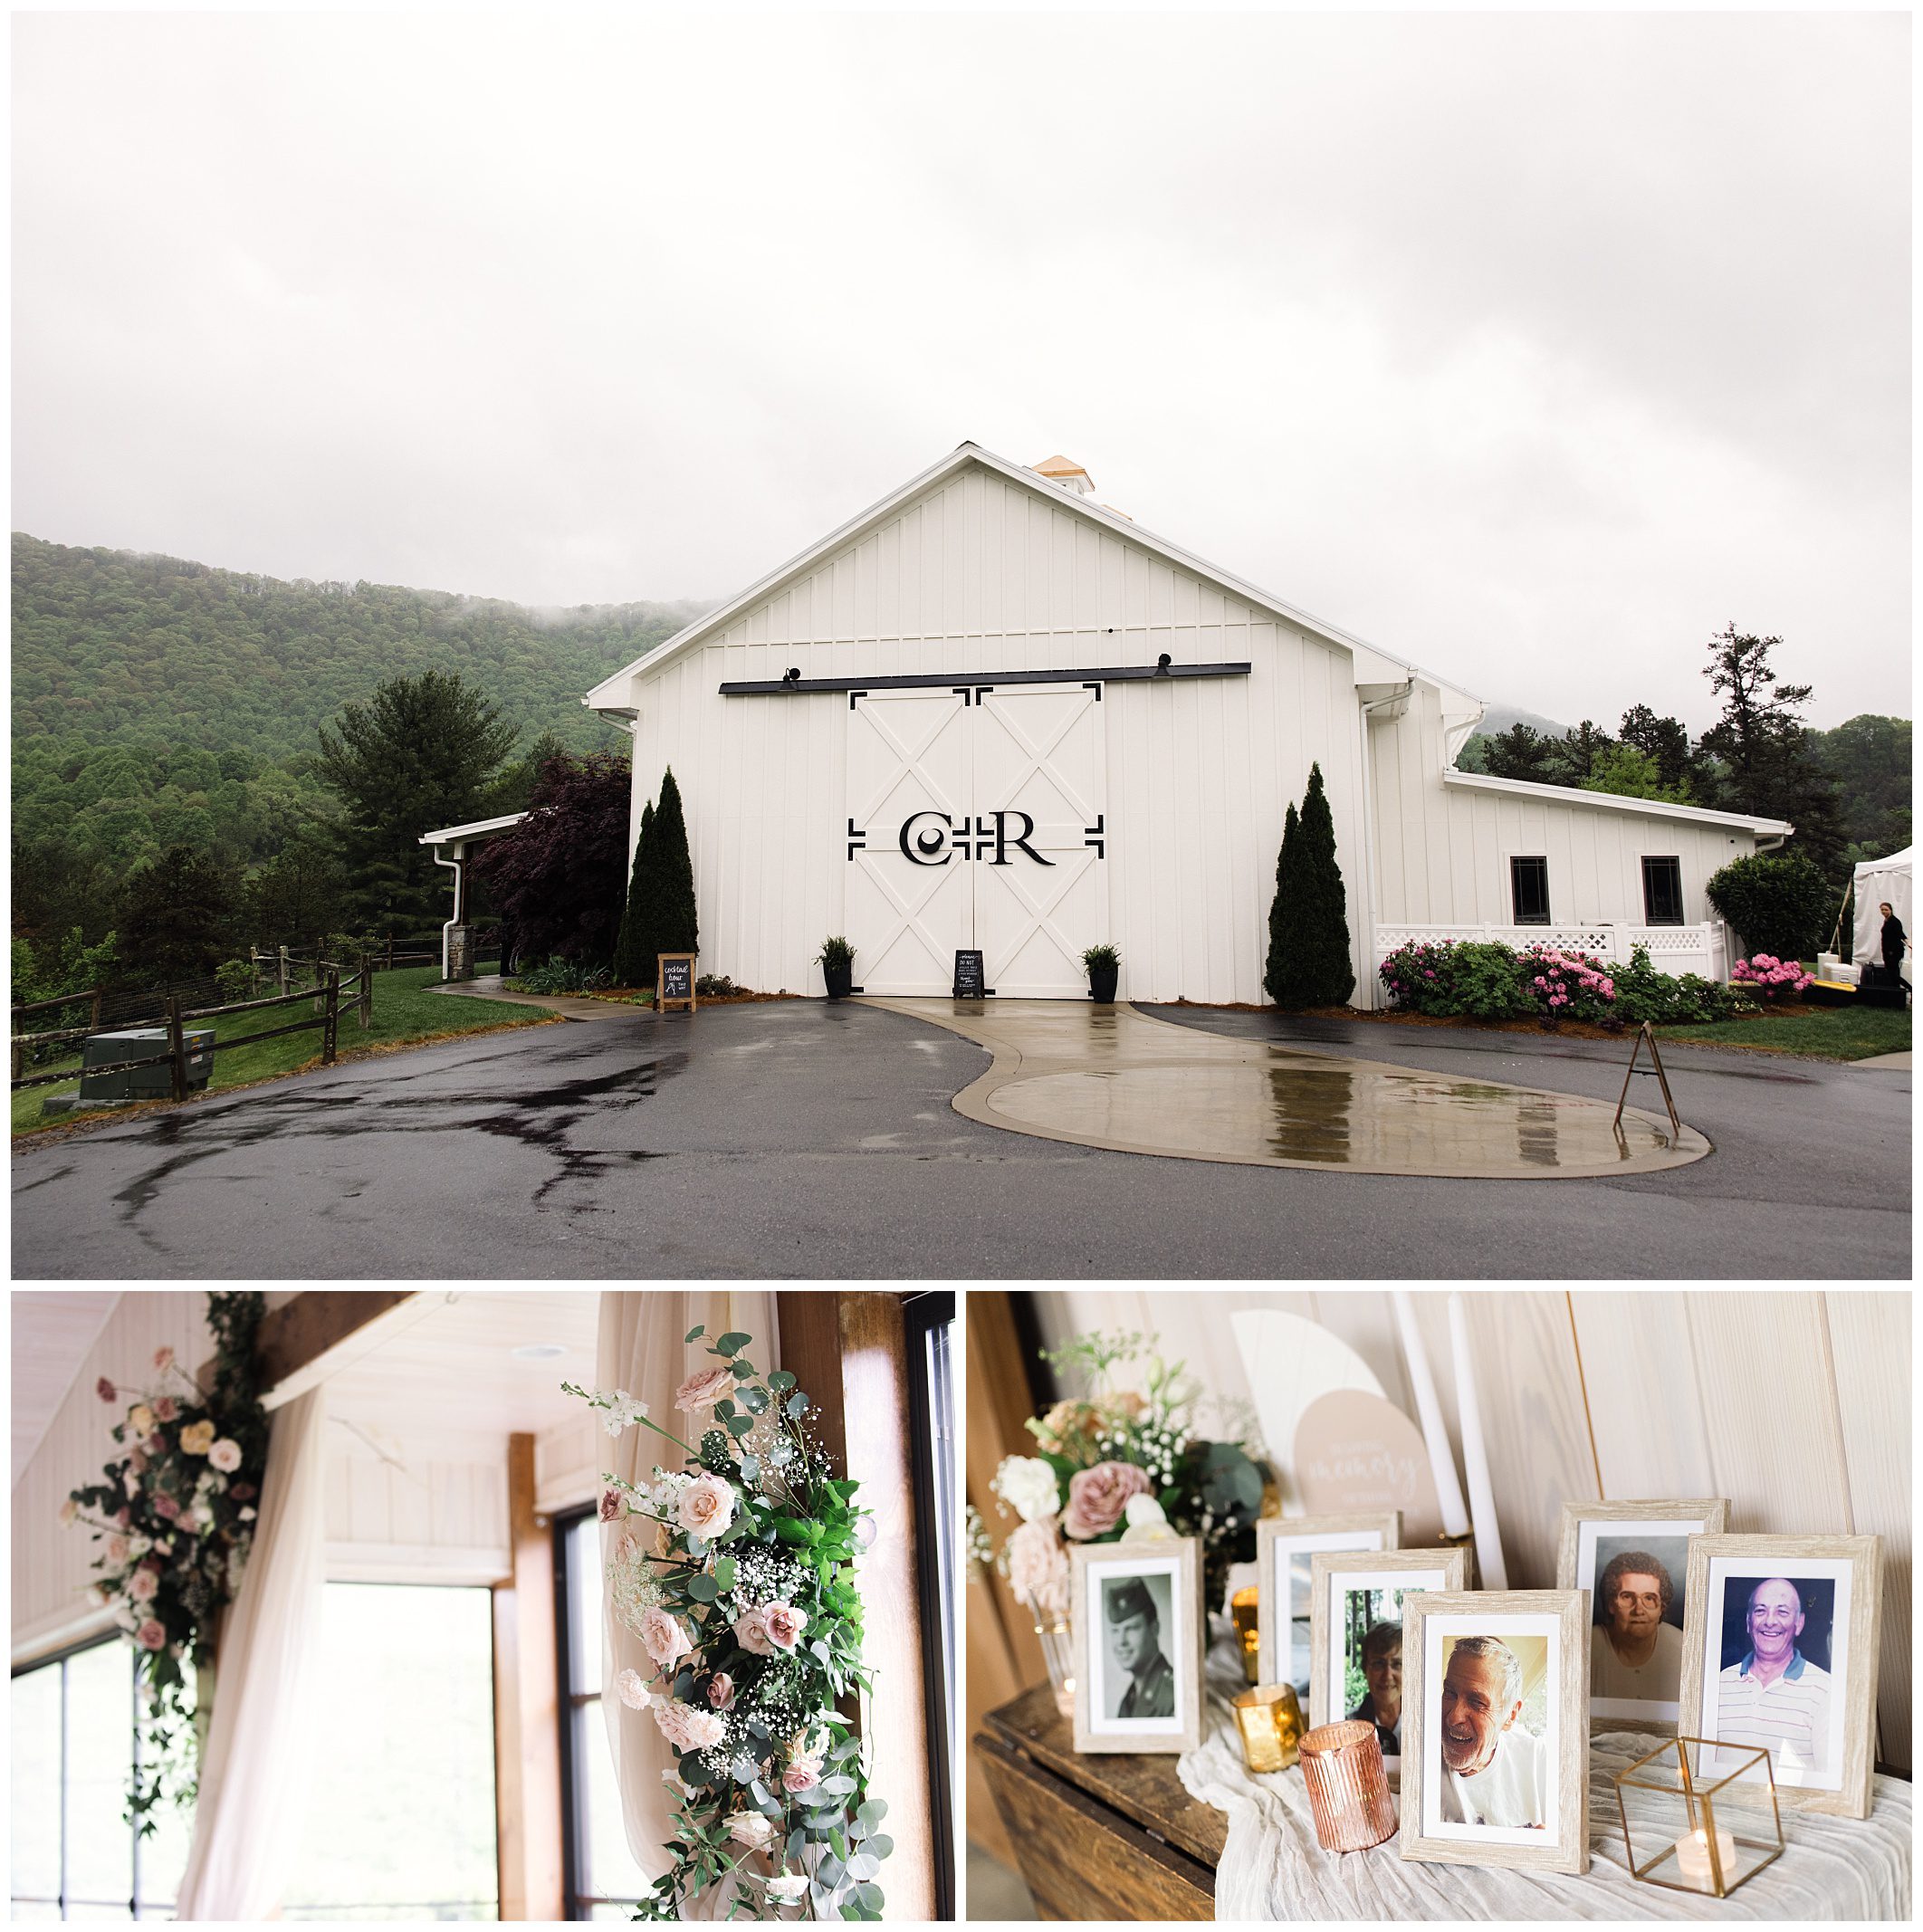 Collage of three images: a large white wedding venue barn against a stormy mountain landscape at Chestnut Ridge, an elegantly decorated interior stairway, and a close-up of framed photographs beside floral arrangements.